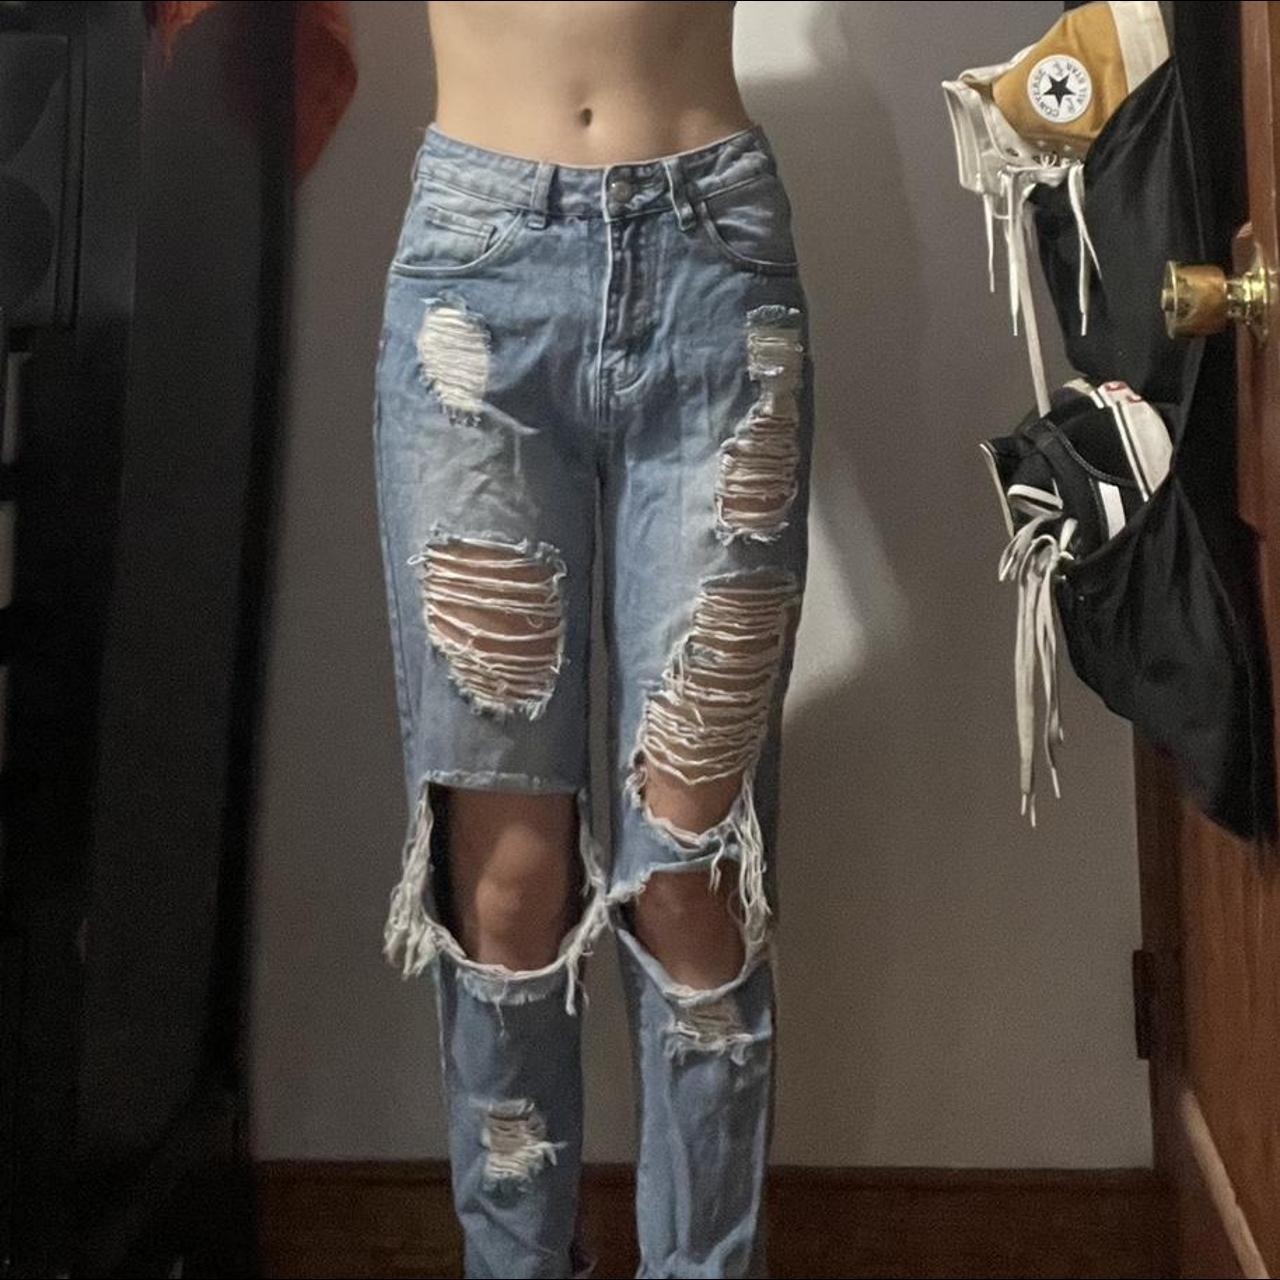 shein xs ripped jeans. too short on me (5’6”) - Depop